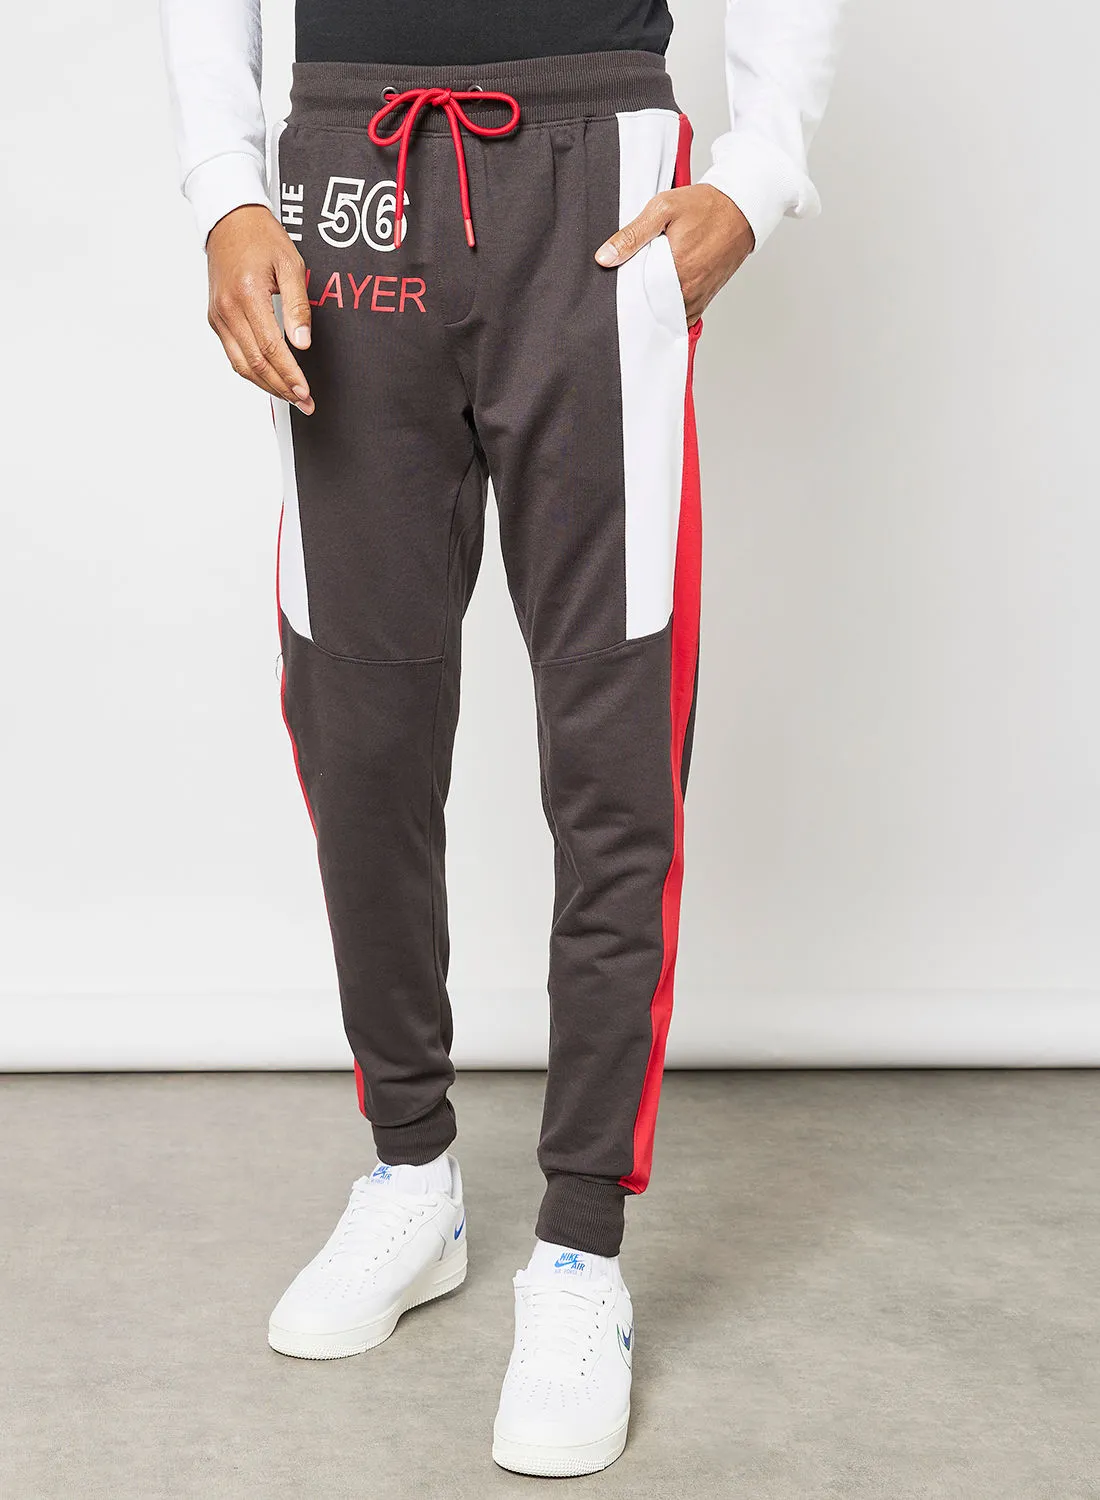 ABOF Regular Fit Joggers Grey/White/Red